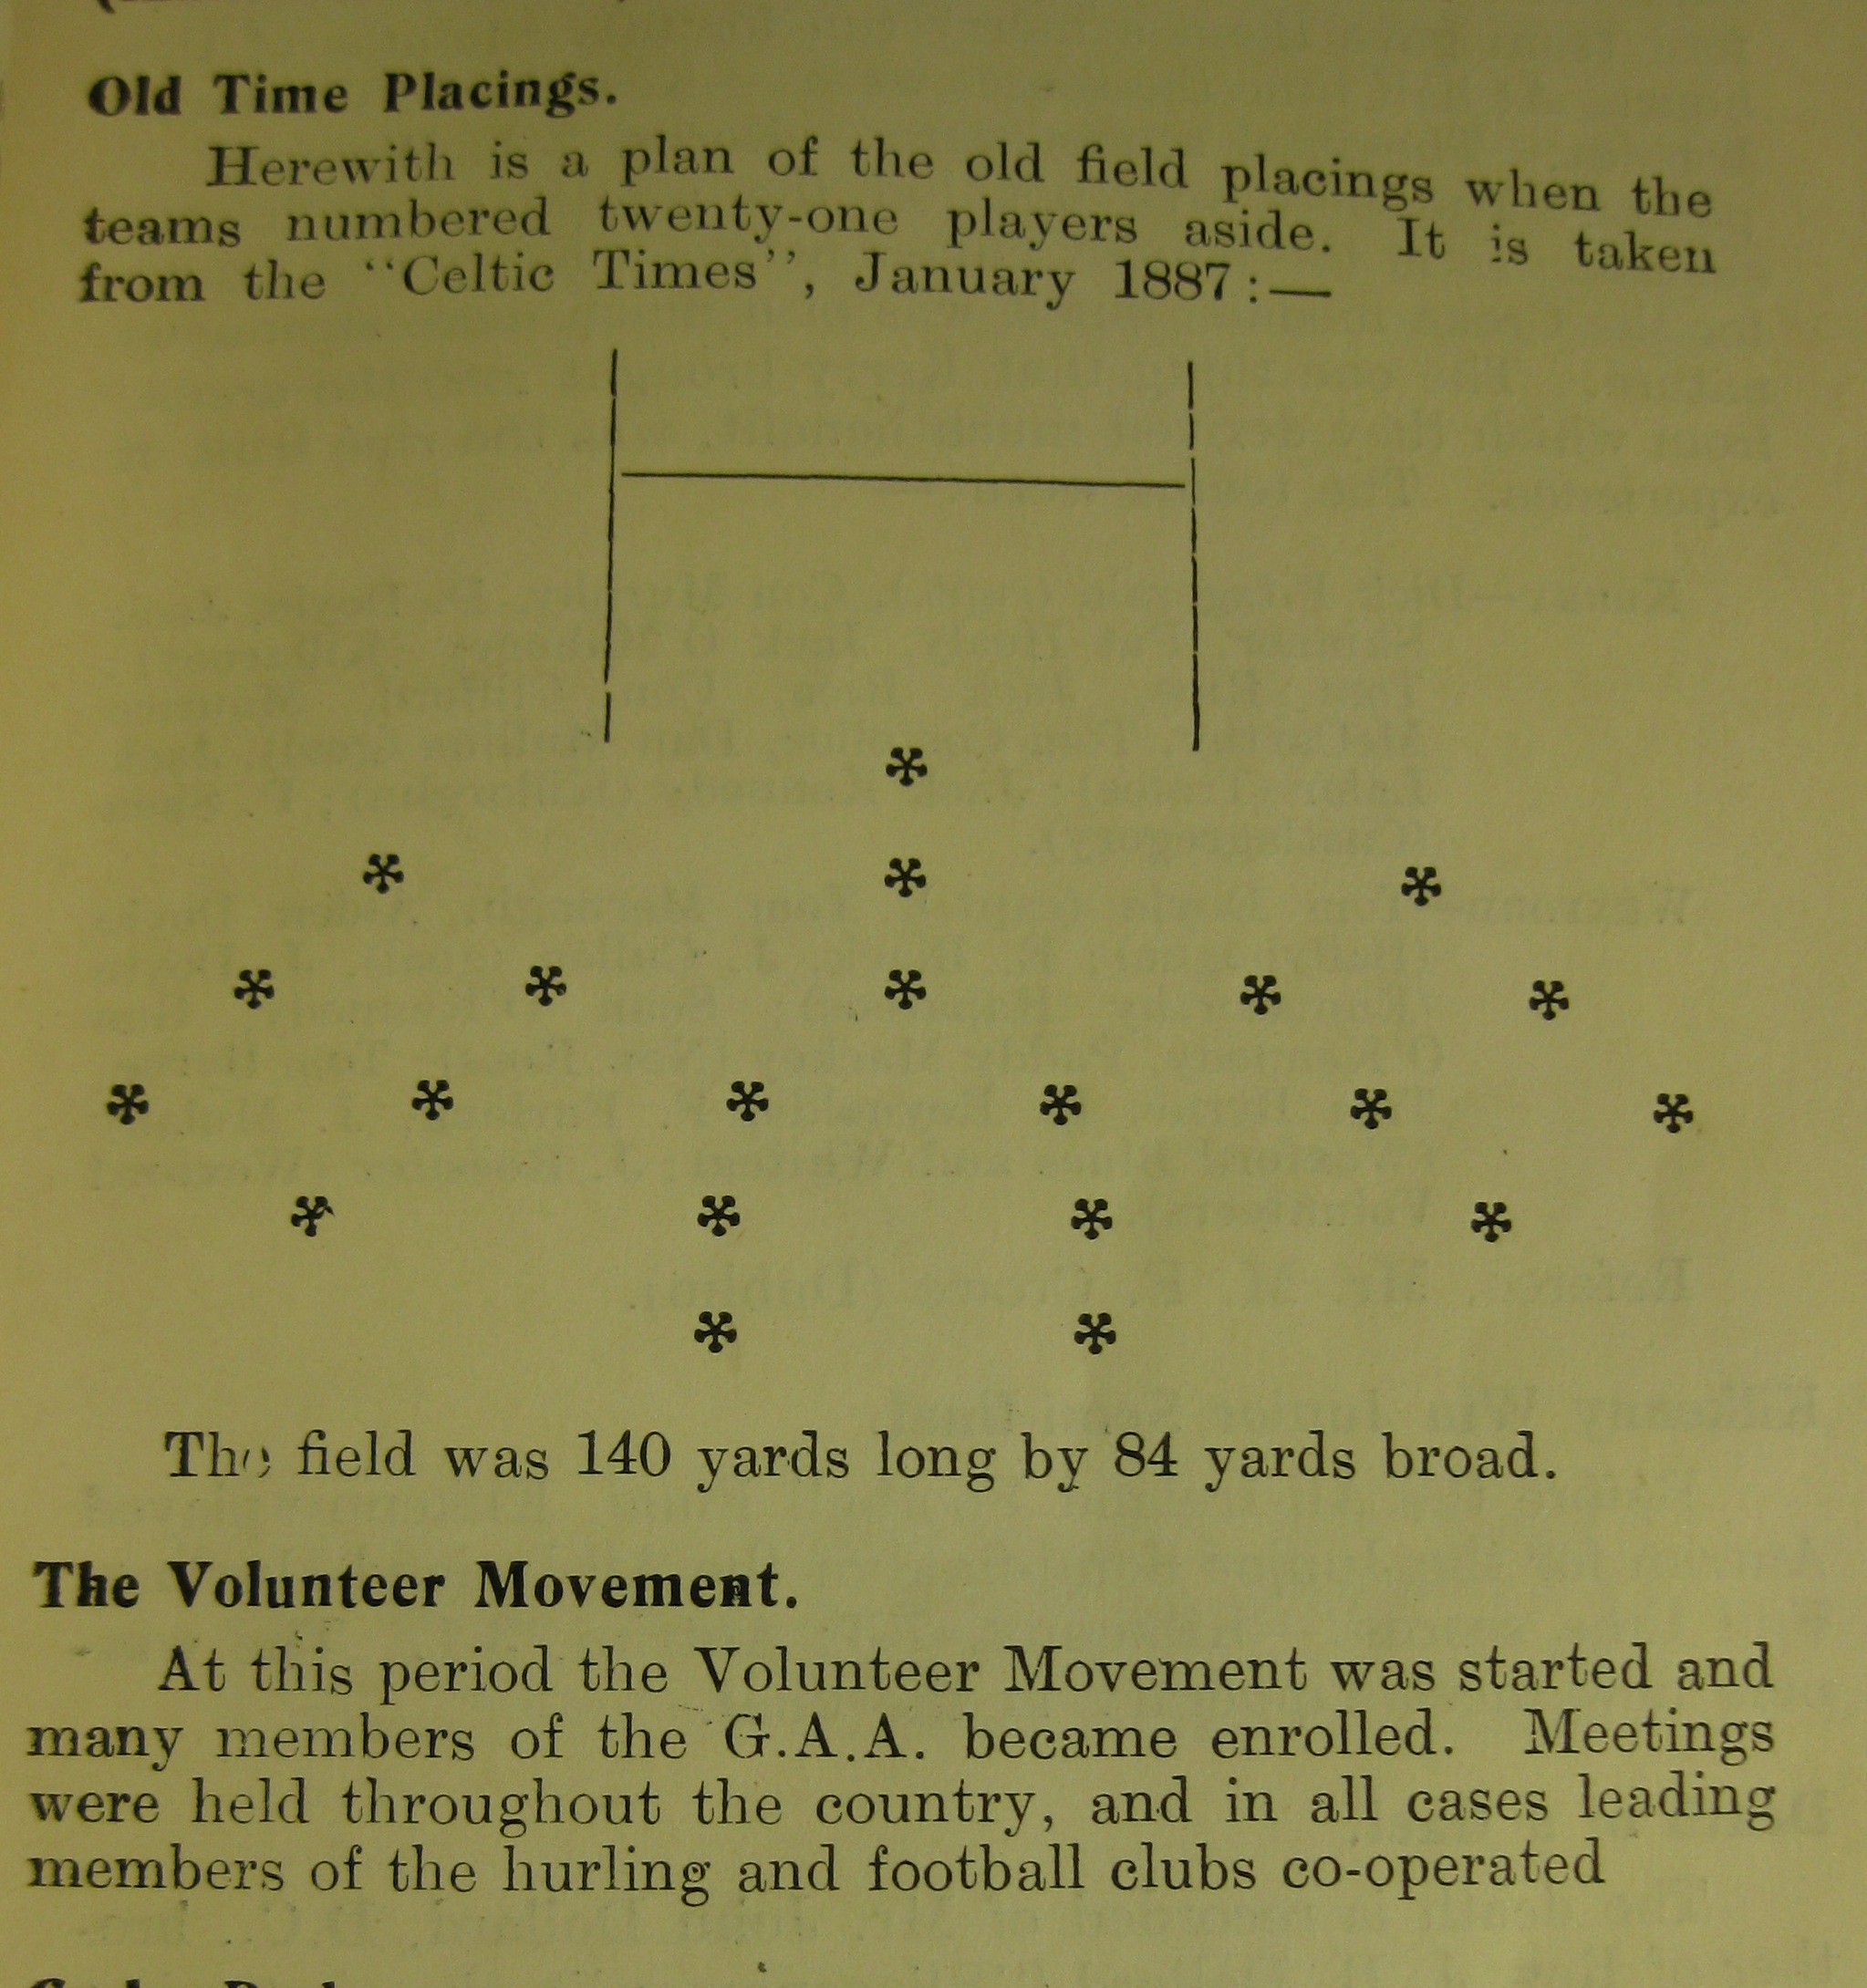 When the GAA was first established, the rules laid down for the playing of football and hurling specified that teams should comprise 21 players. This document illustrates the manner in which the players should line out.